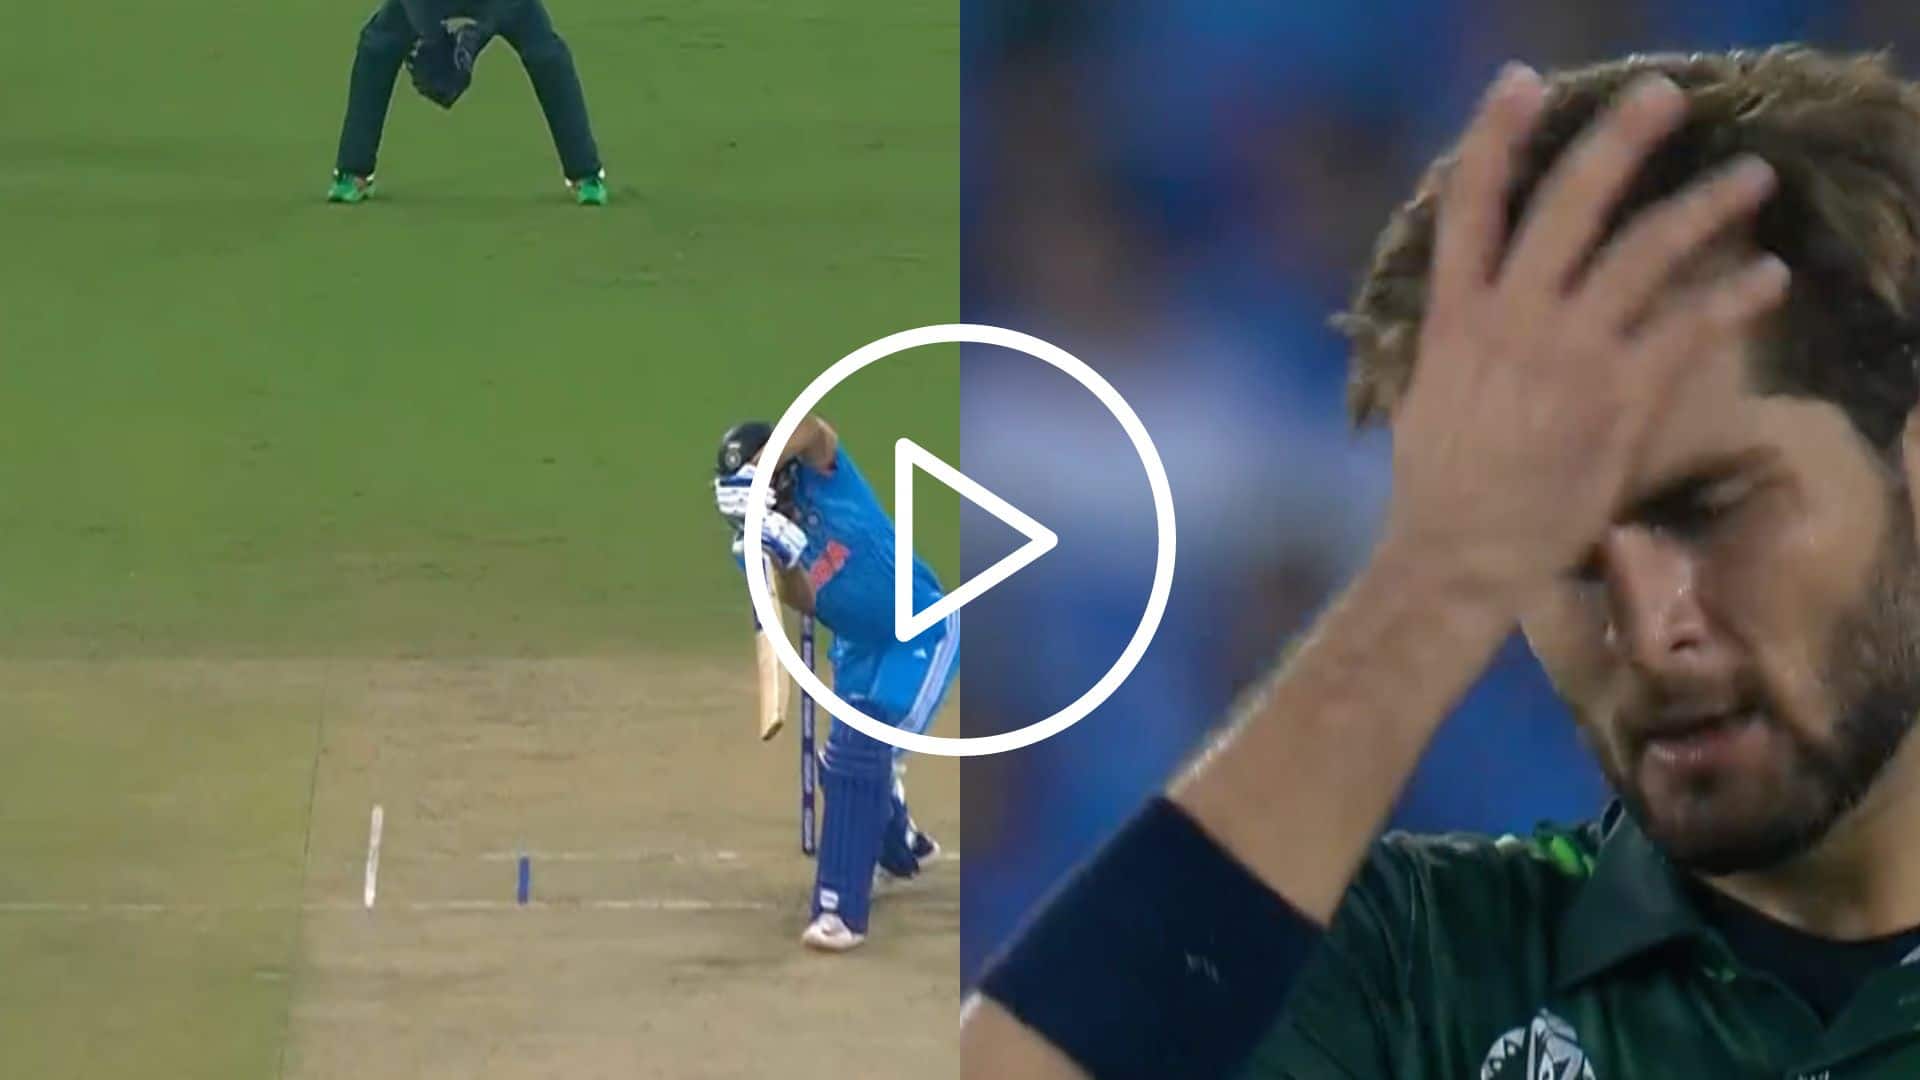 [Watch] Shubman Gill Slams Glorious Boundary Vs Shaheen Afridi On His First Ball After Dengue